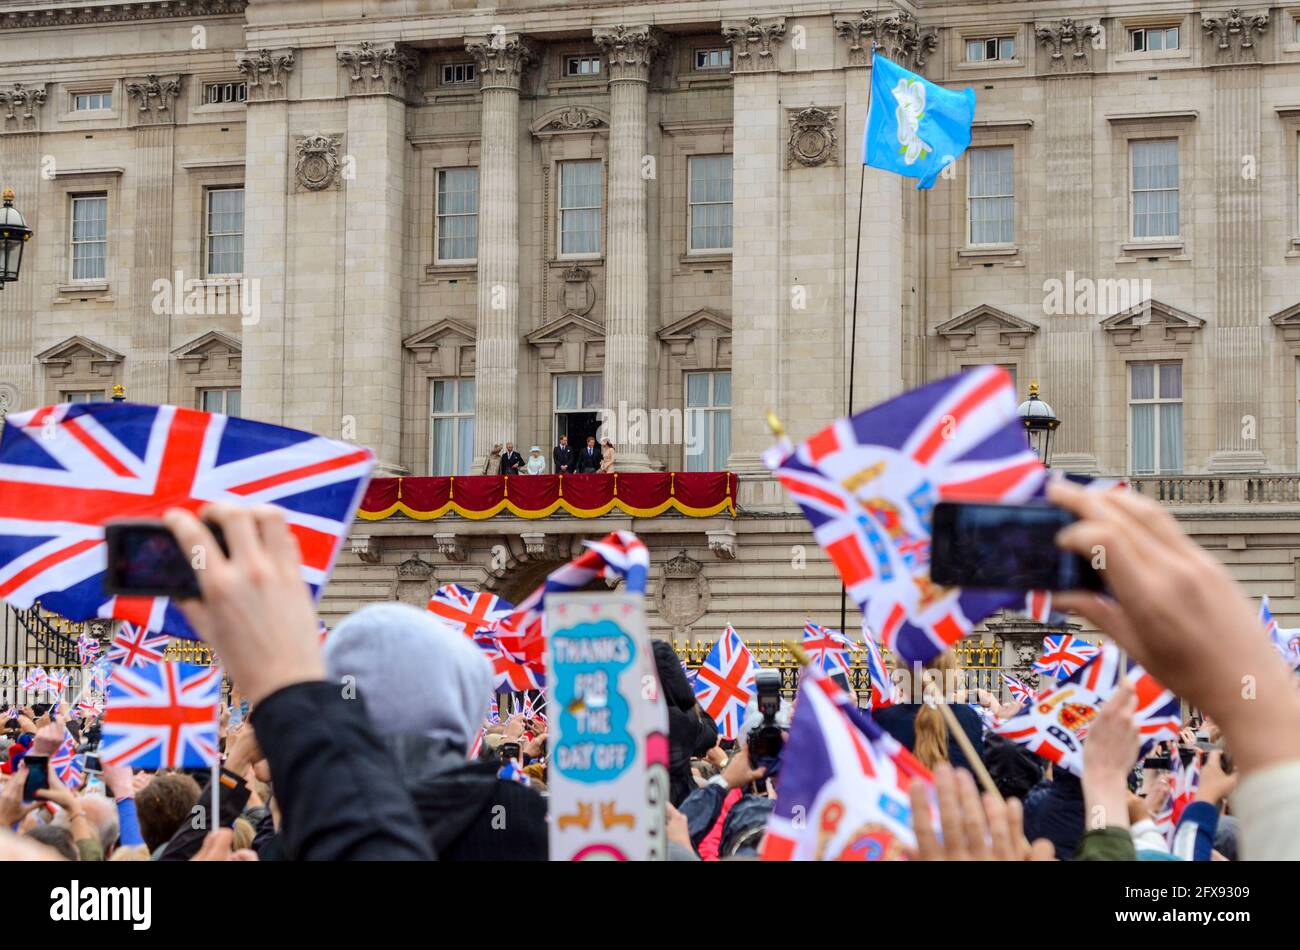 Crowds outside Buckingham Palace at the Queens Diamond Jubilee celebration in London, UK, with The Queen and family on the balcony in distance Stock Photo